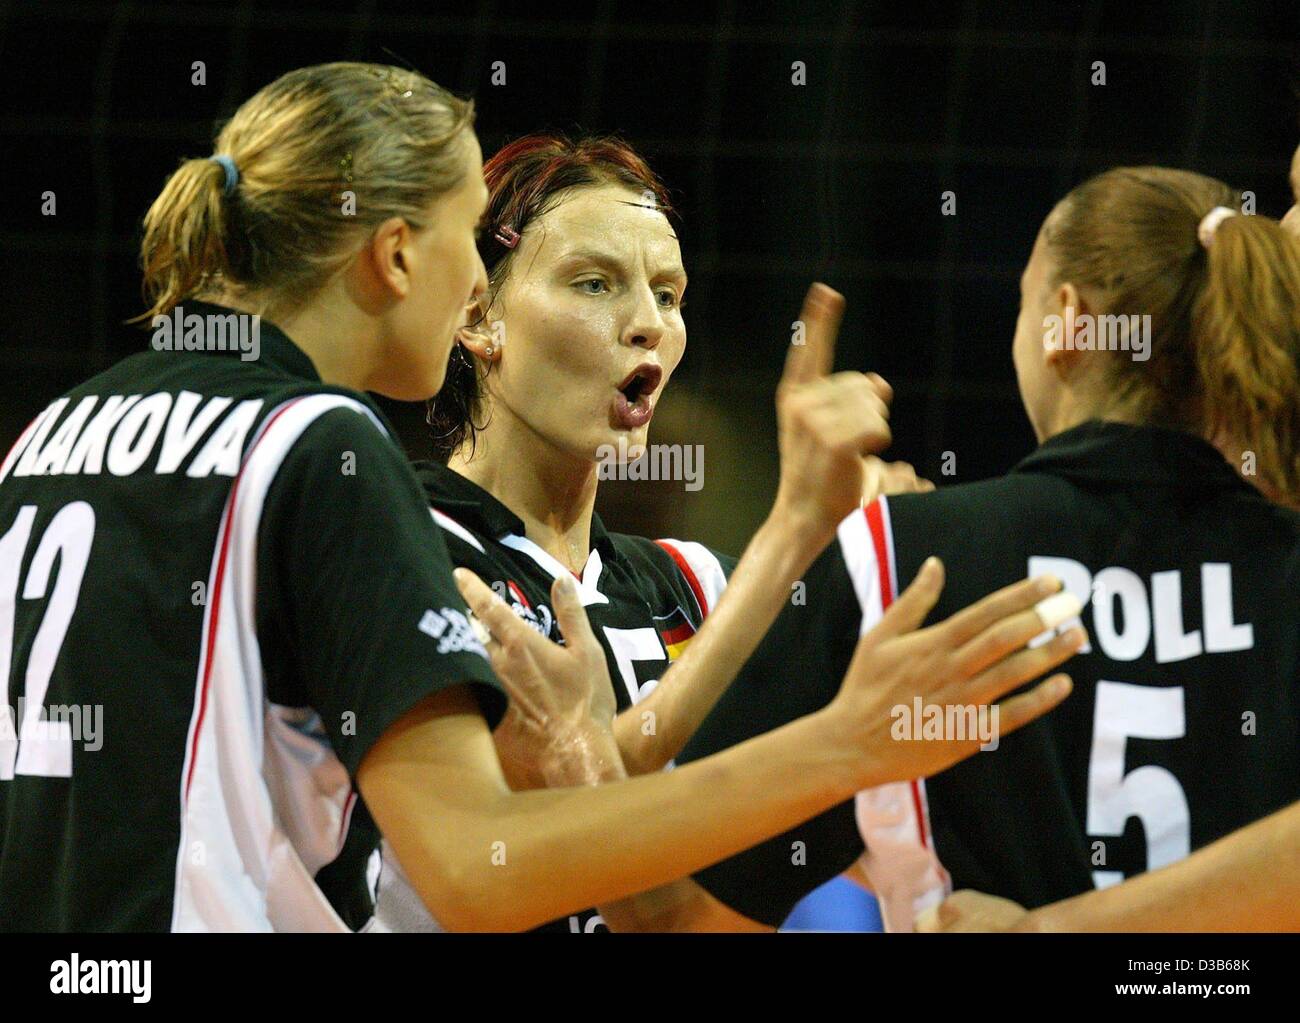 (dpa) - German player Angelina Gruen (C) discusses with her team mates Olessya Kulakova (L) and Sylvia Roll during their match against Italy at the Women's Volleyball World Championships in Muenster, 2 September 2002. Germany lost 0-3. This second defeat after the 0-3 against Bulgaria brought the Ge Stock Photo